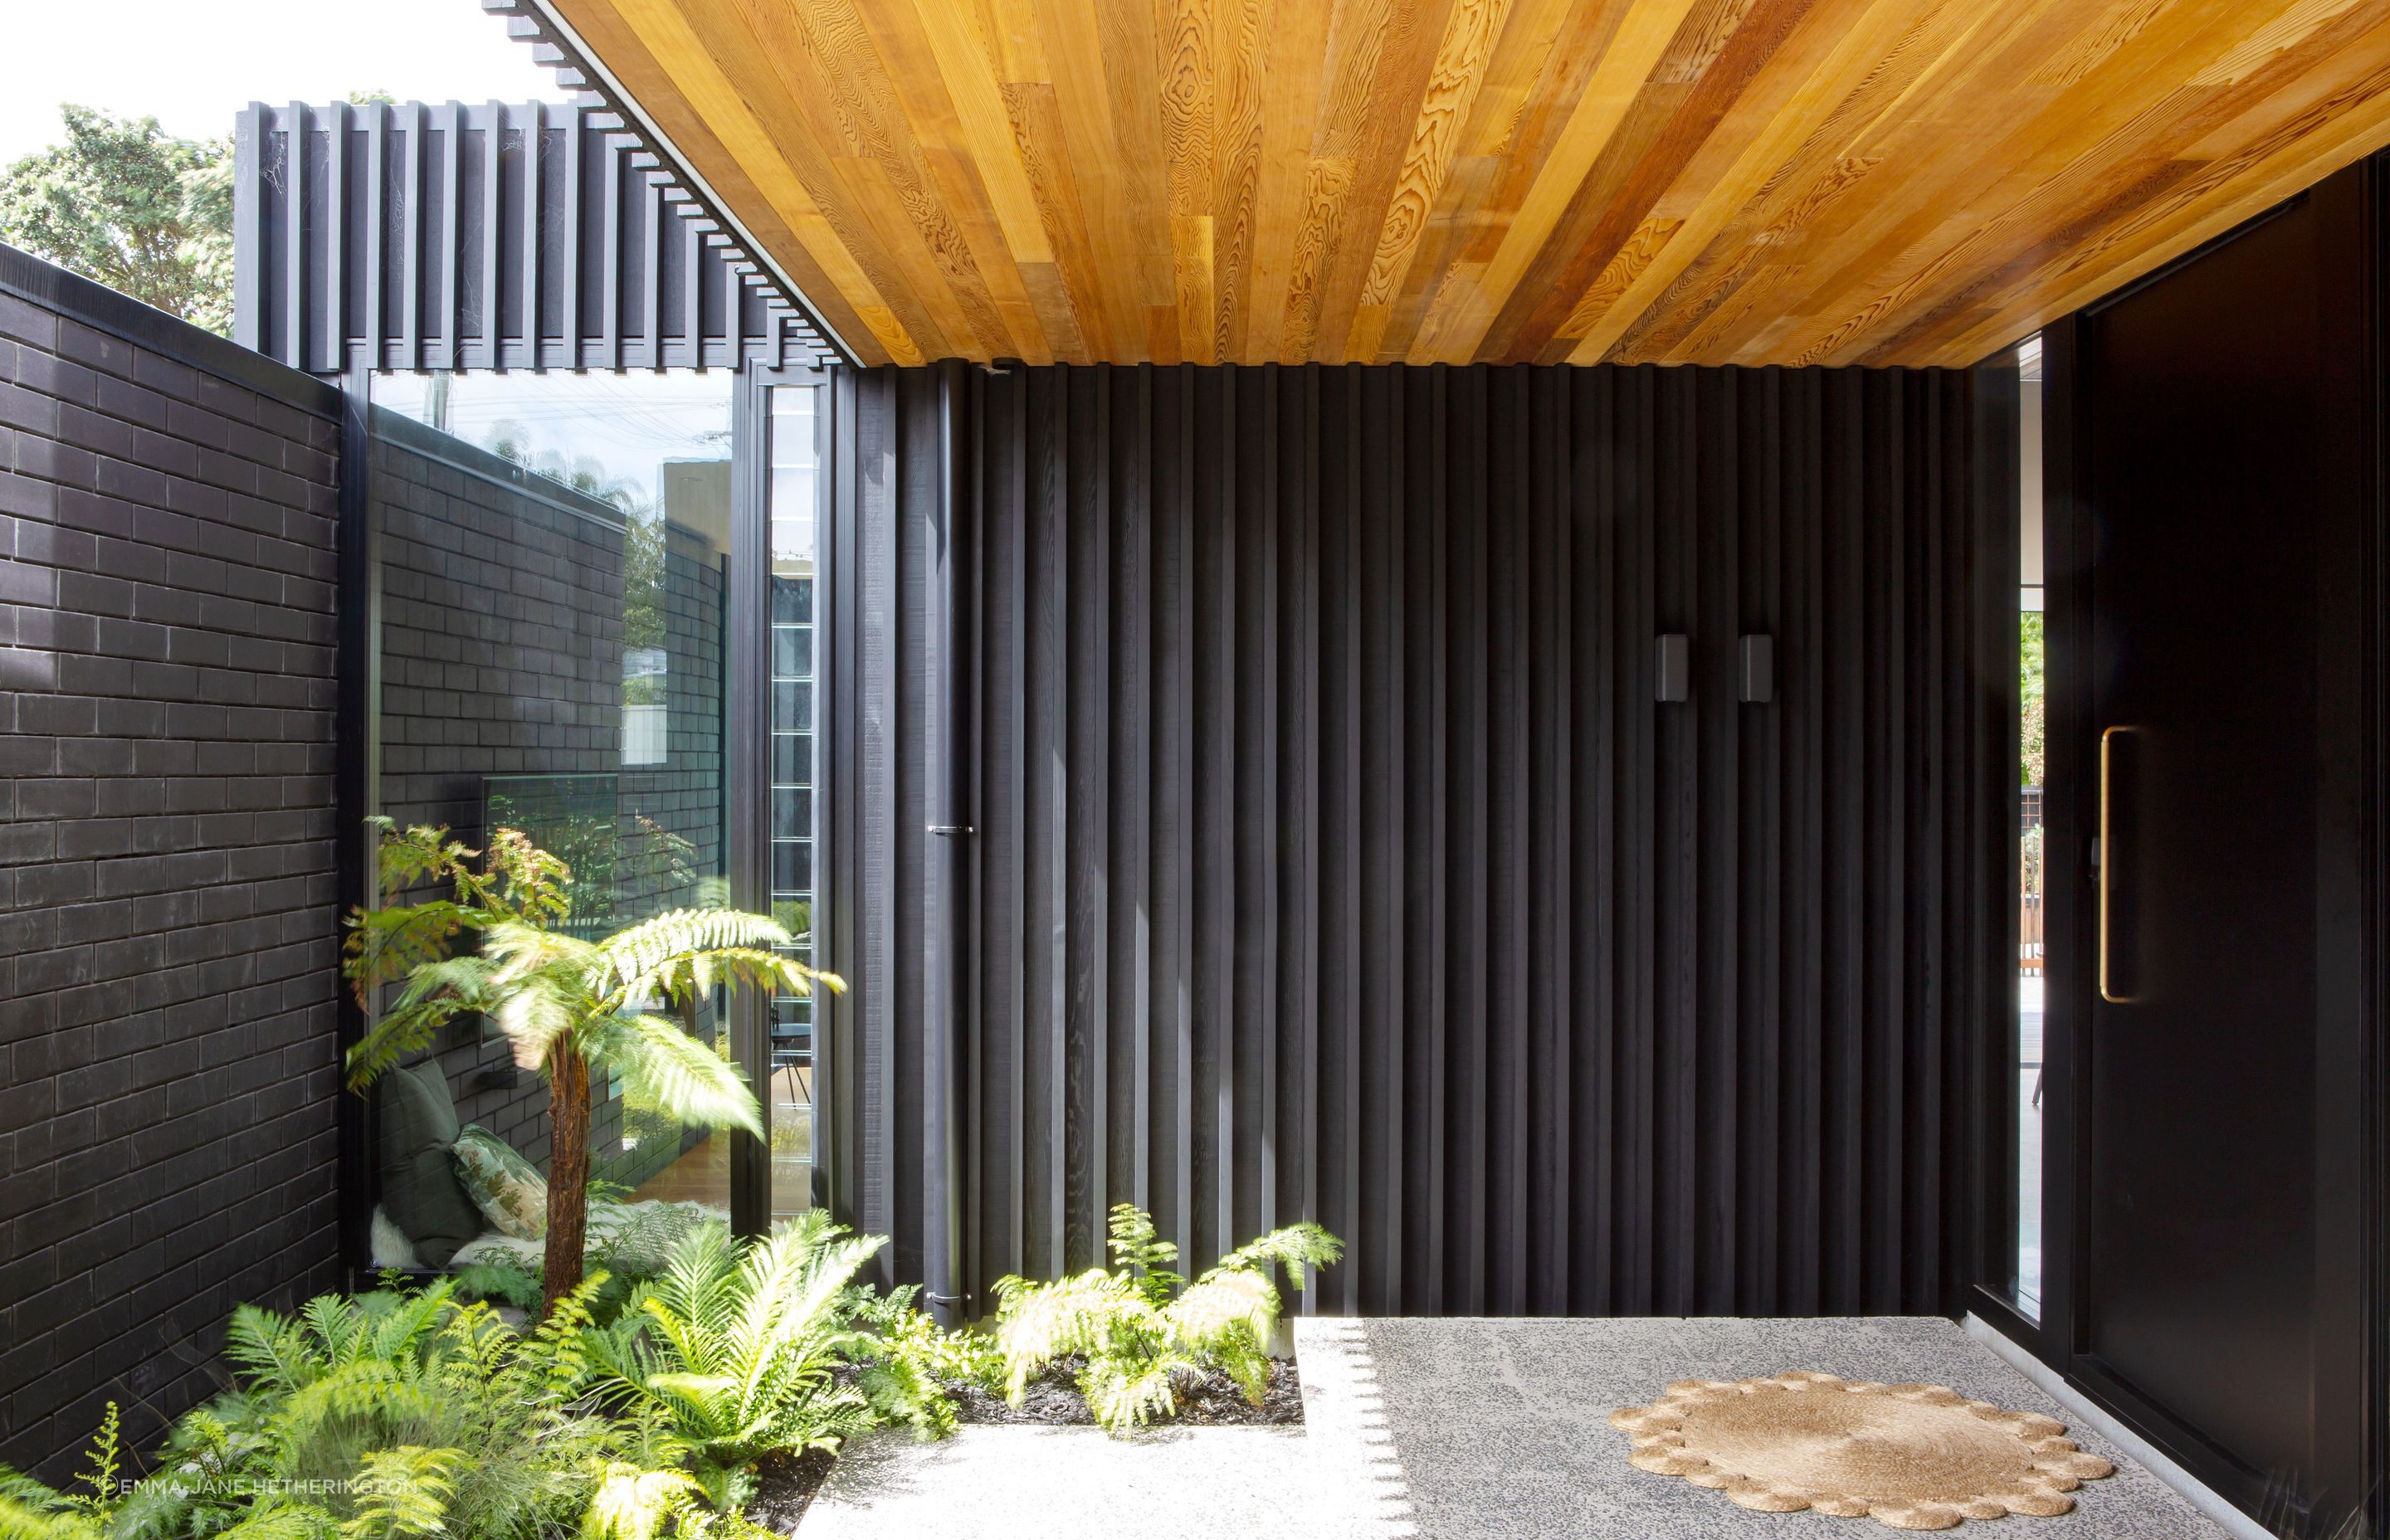 The front door, reached after walking through layers of gardens to ensure privacy. “It allows us to use that outdoor space as part of the entry,” says Tim. Dorrington Atcheson Architects worked with Strachan Group Landscape Architects on the landscaping.